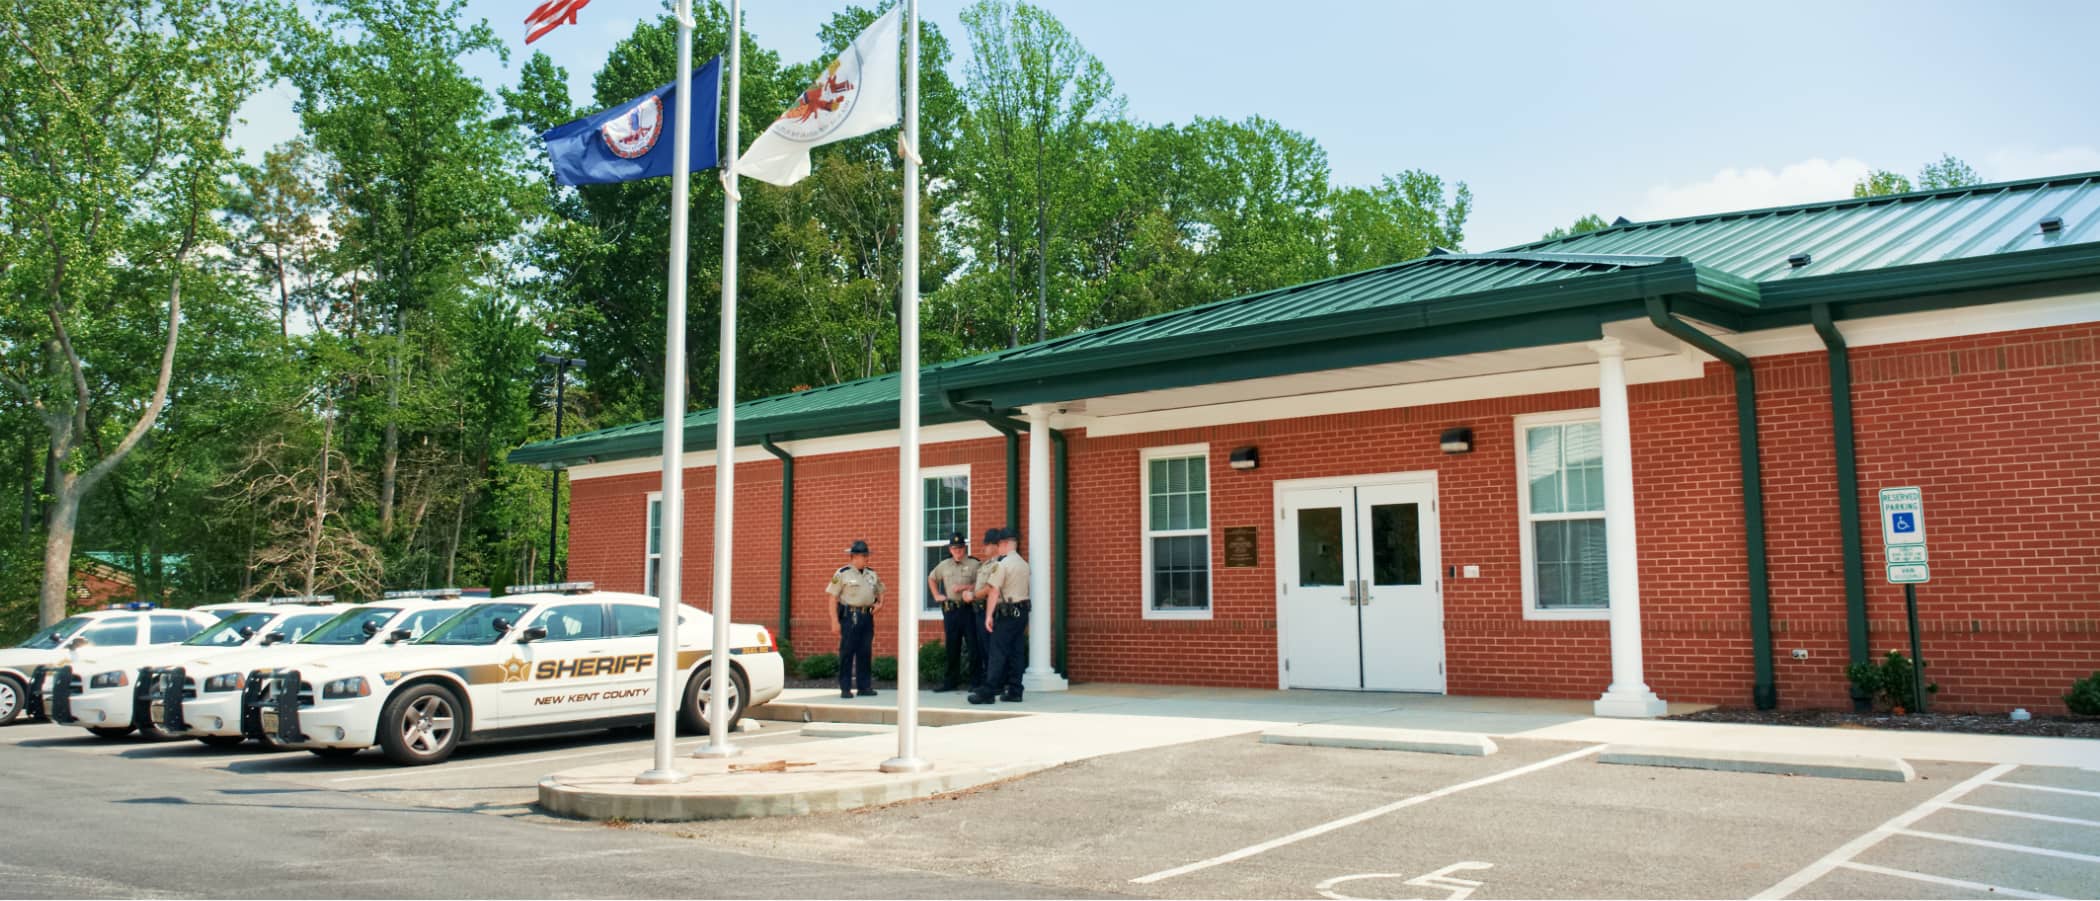 Image of New Kent County Sheriff and Jail